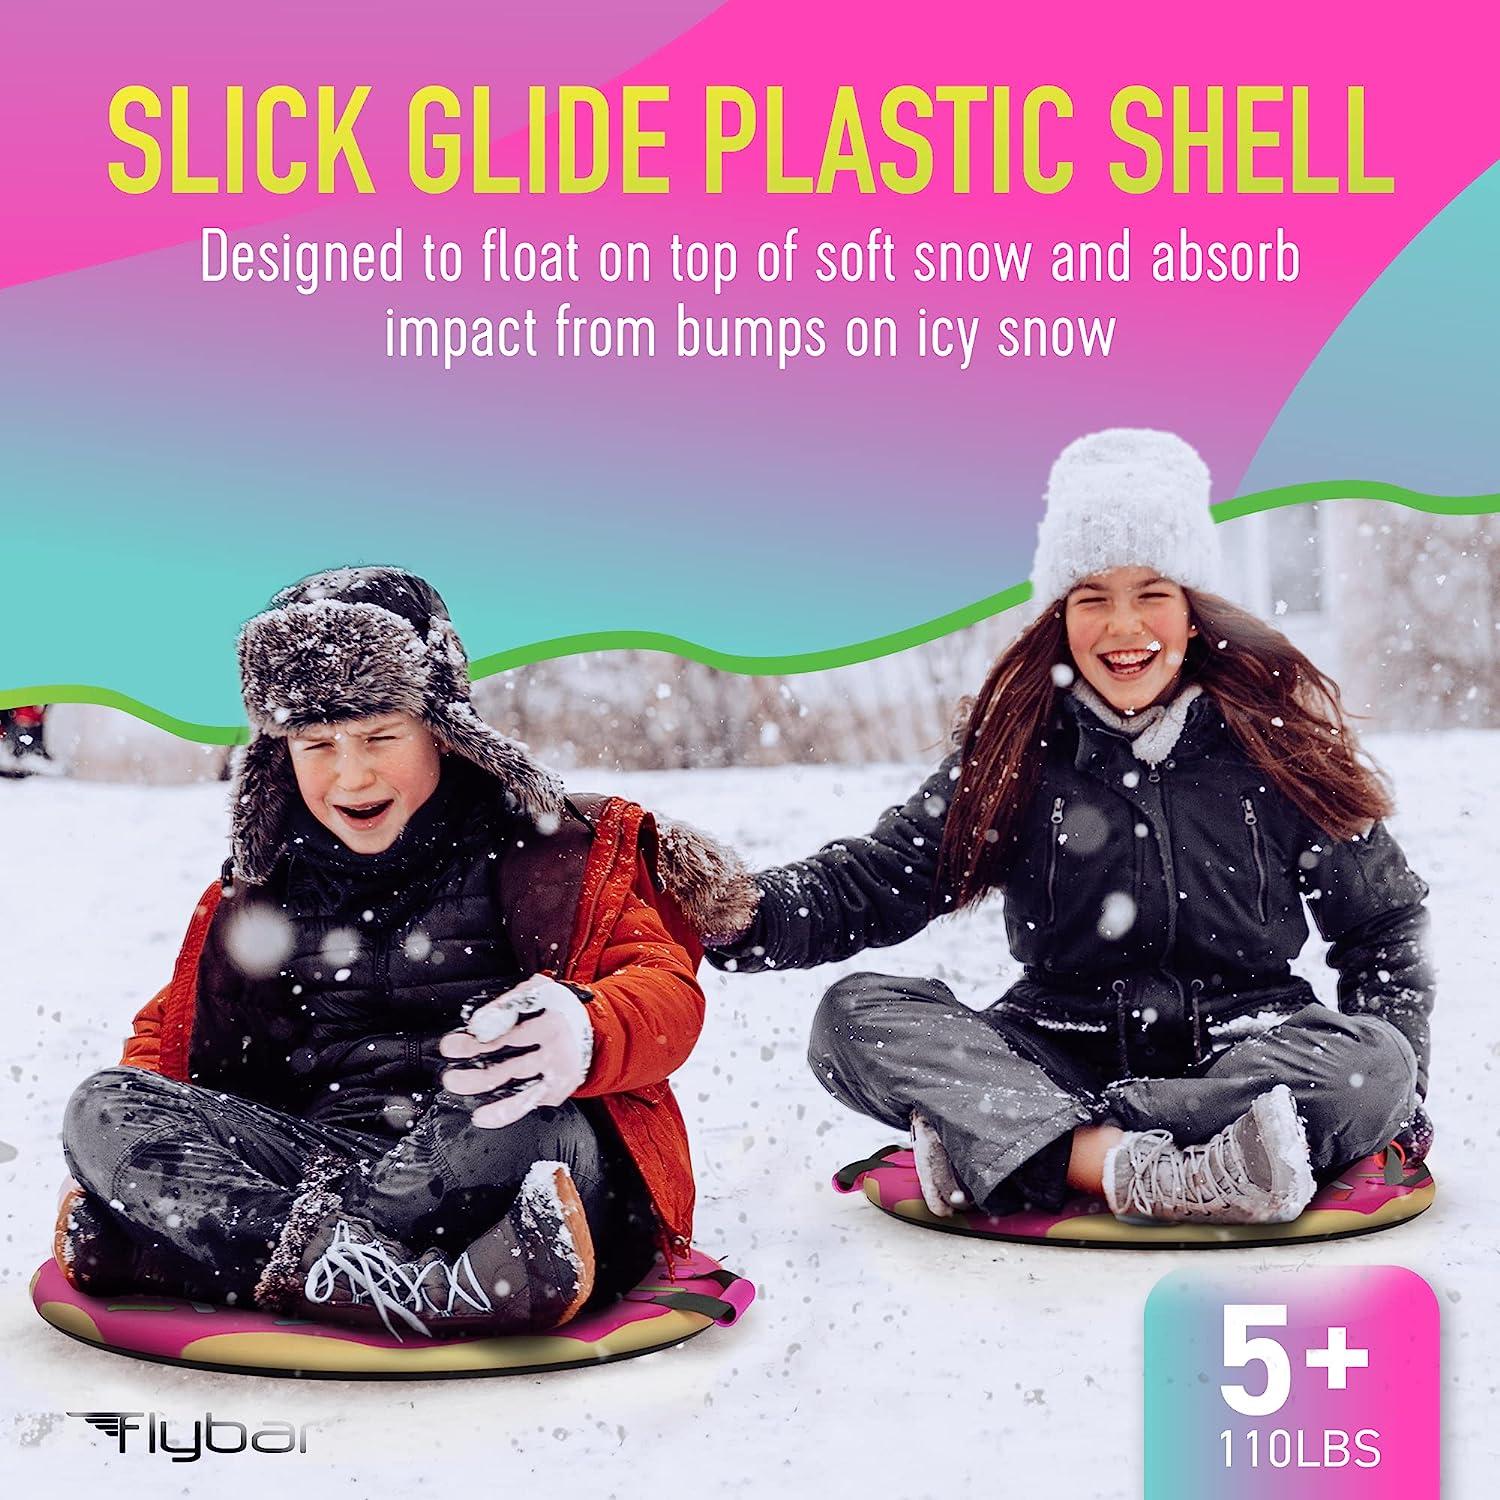 Flybar Snow Sled for Kids - Foam Saucer Disc Sled, Ages 6+, Easy